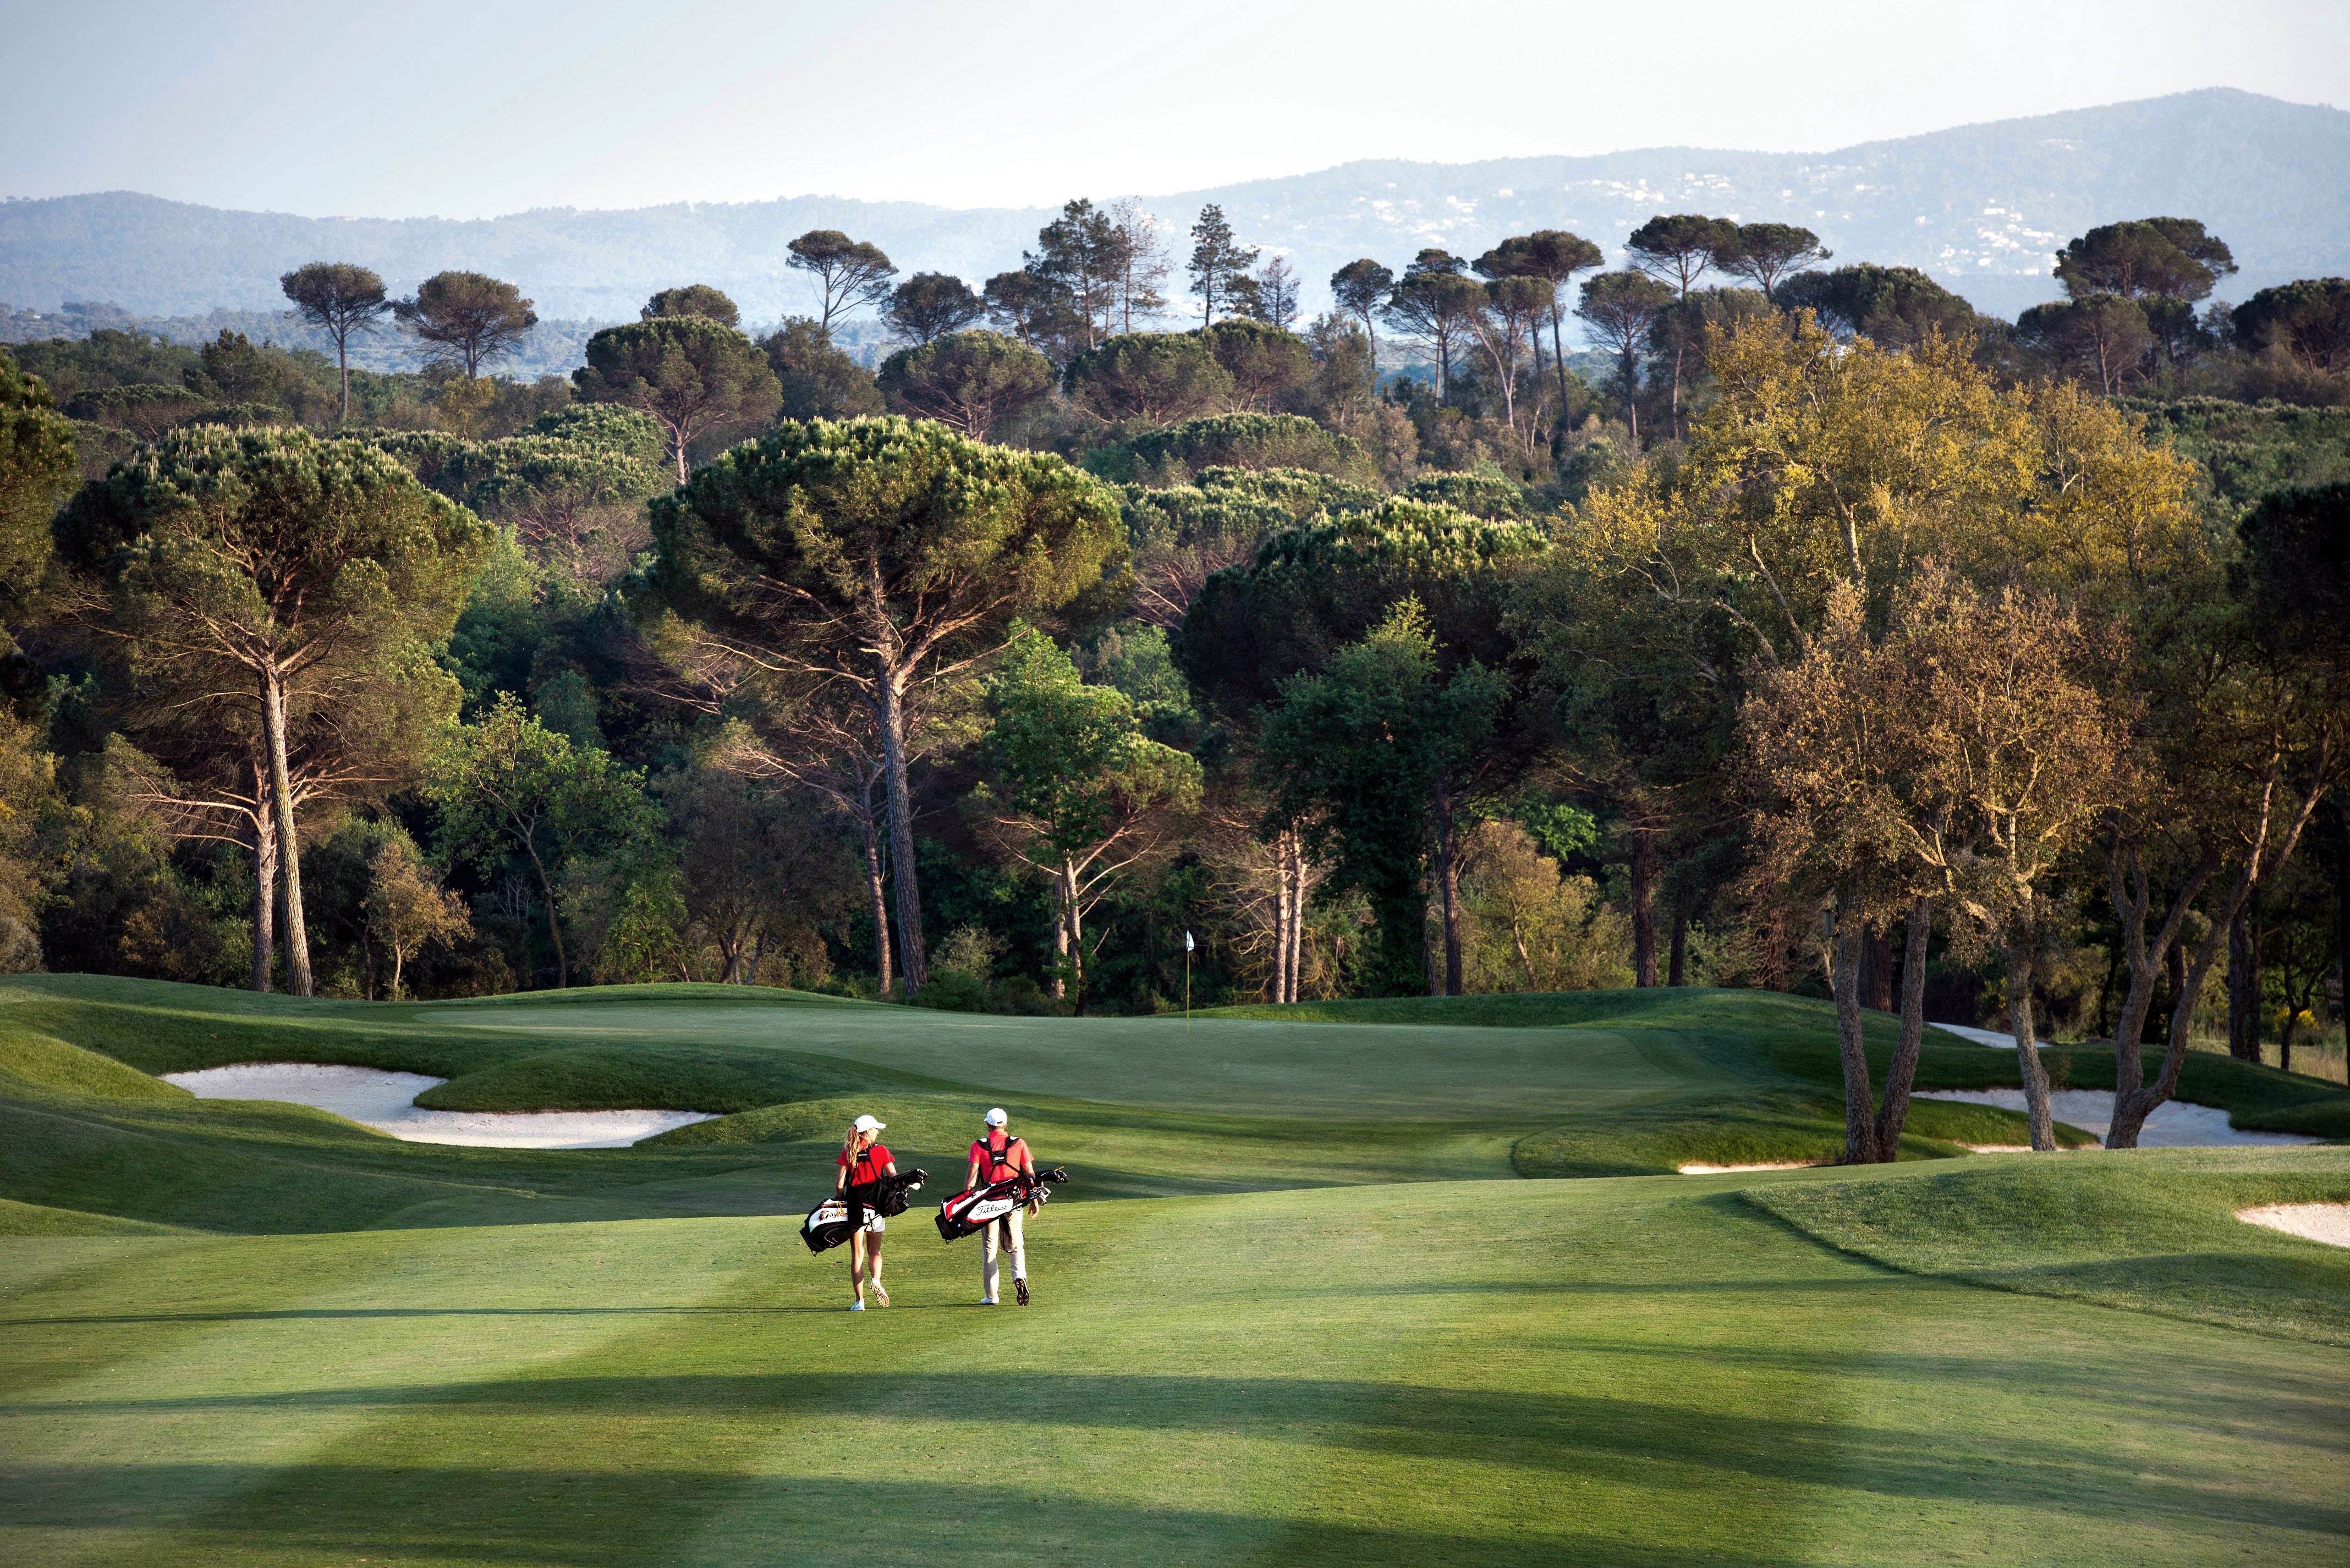 Catalan government blocks a third golf course at Caldes, and the 2031 Ryder Cup looks further away